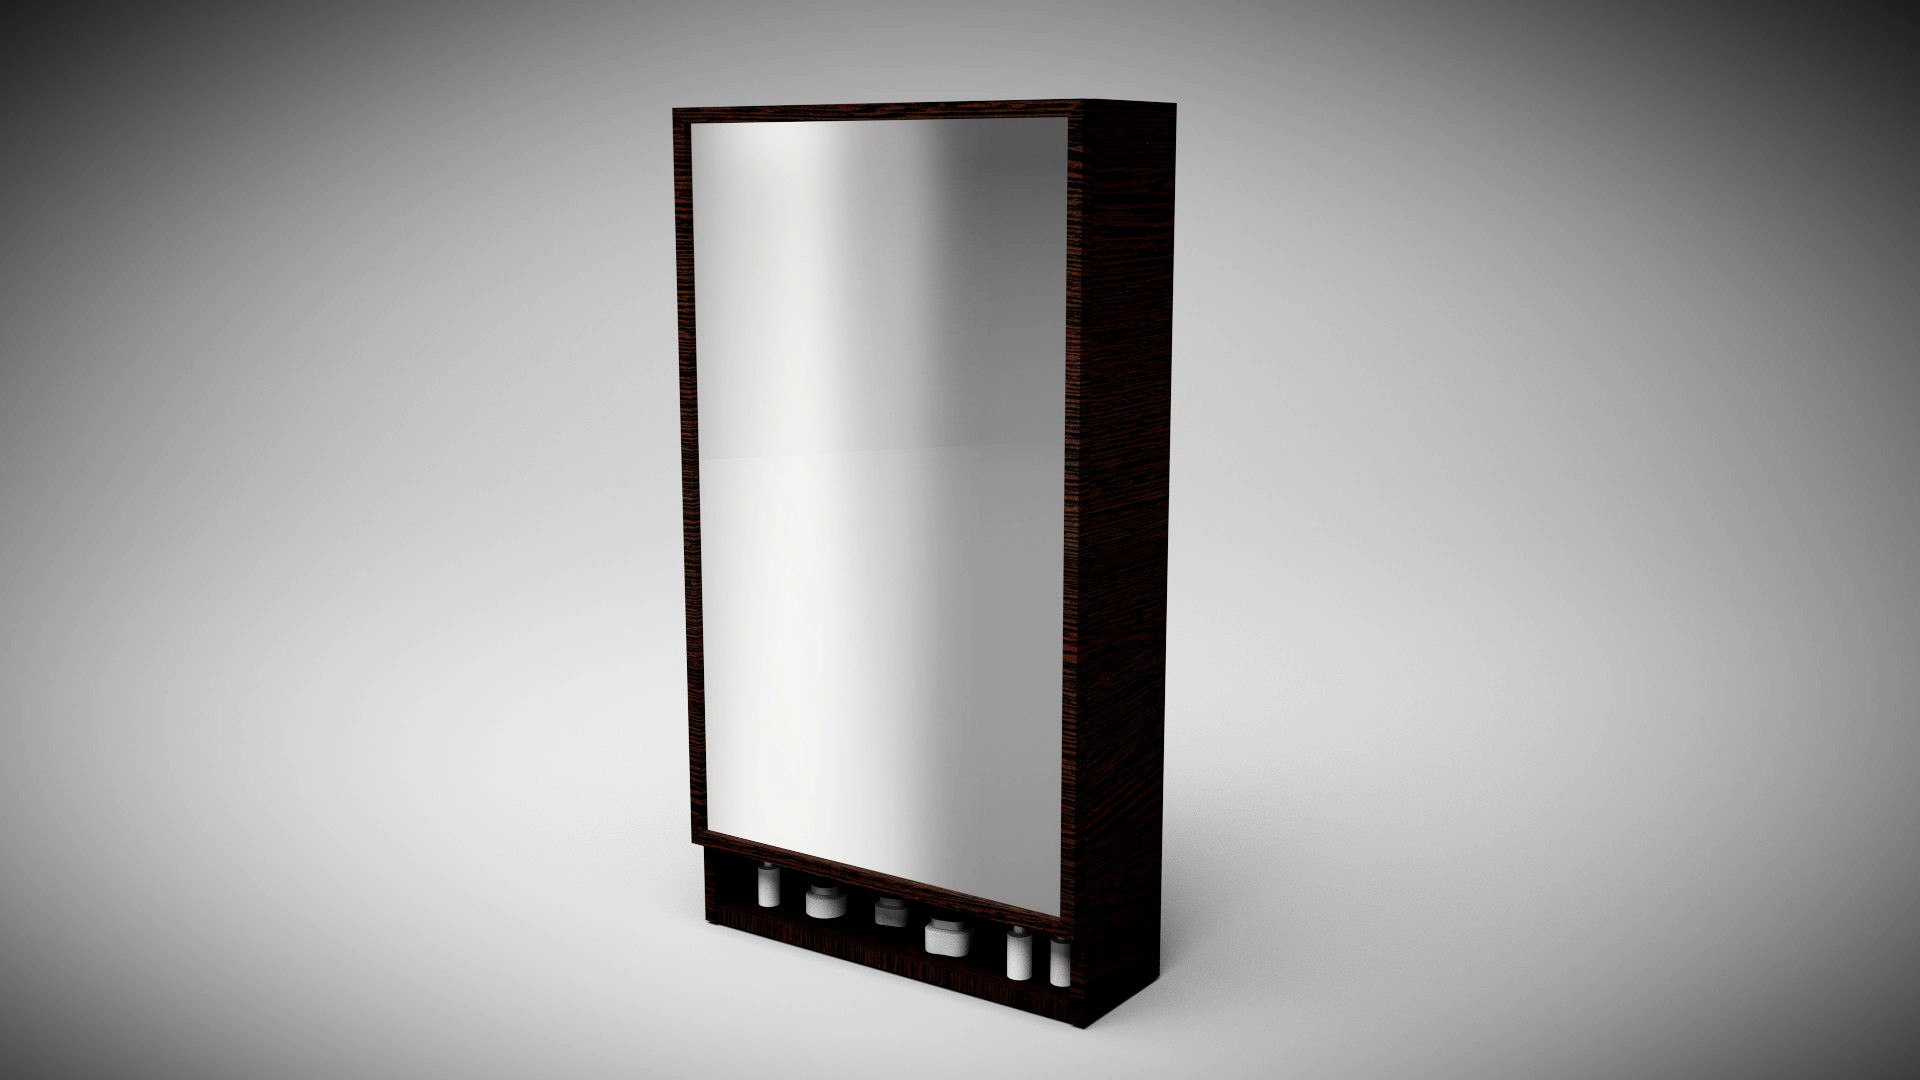 Bathroom Wall Cabinet, Low Poly